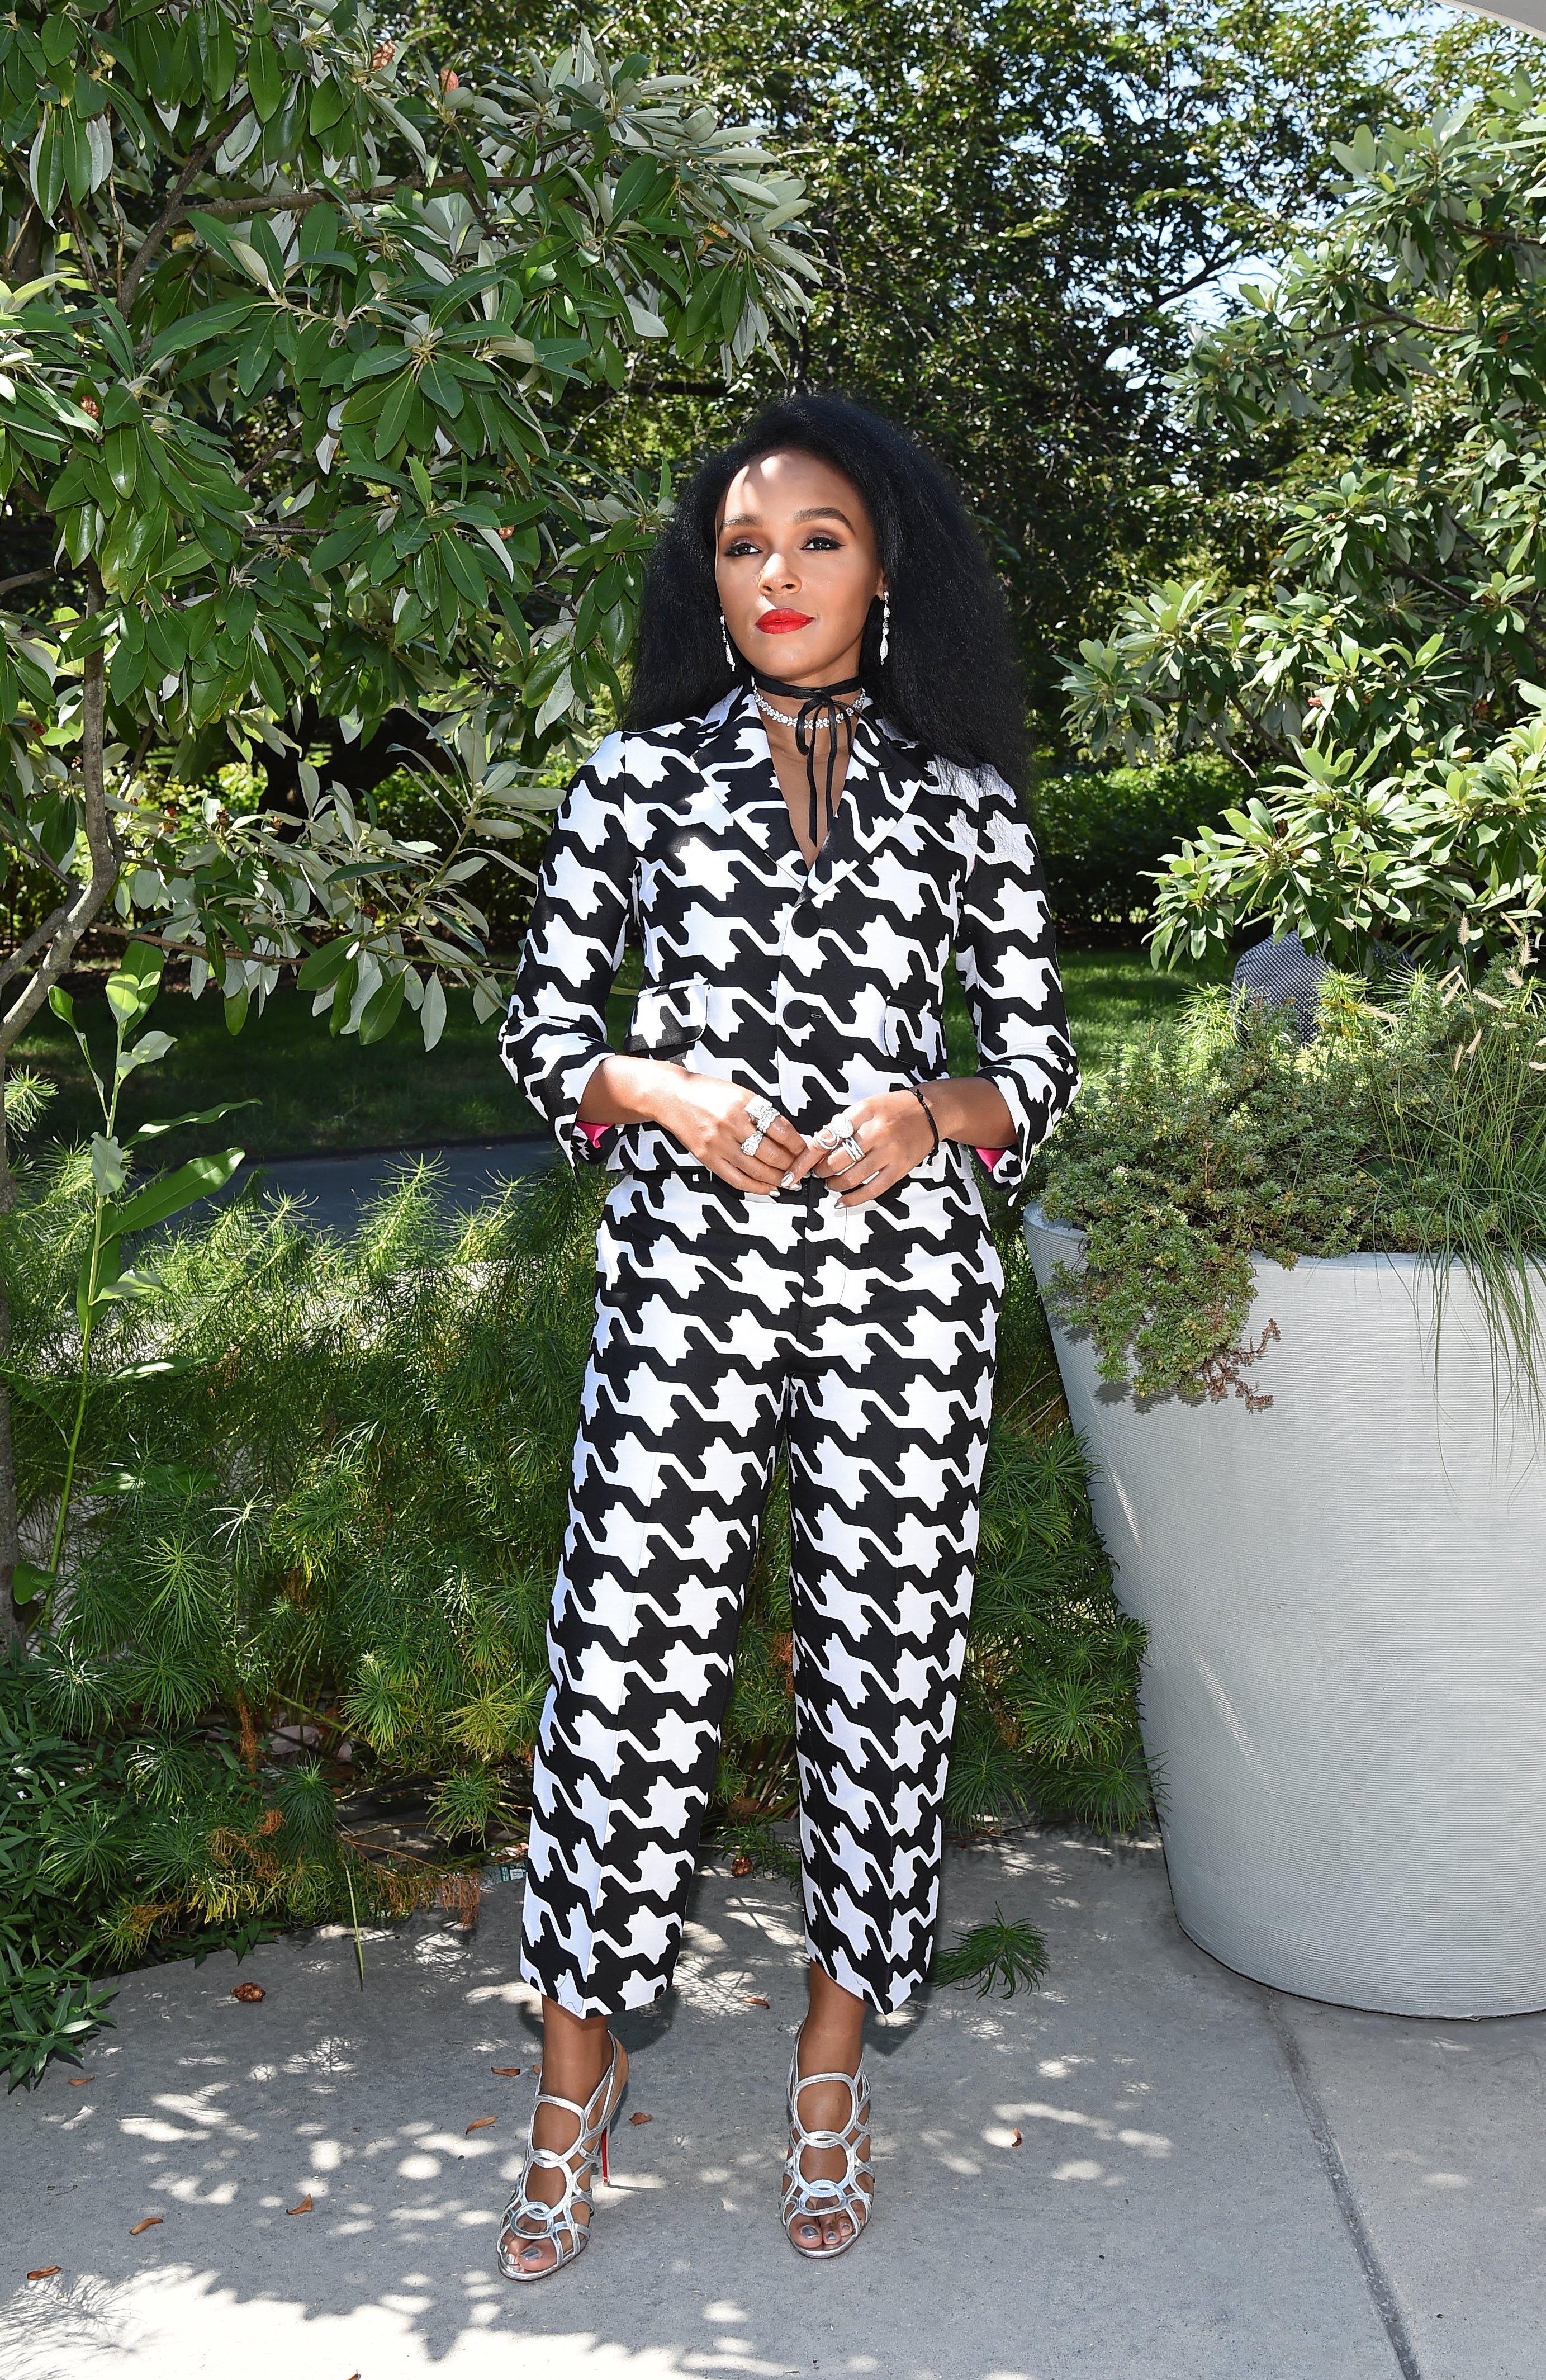 Janelle Monae's Most Striking Black and White Style Moments
